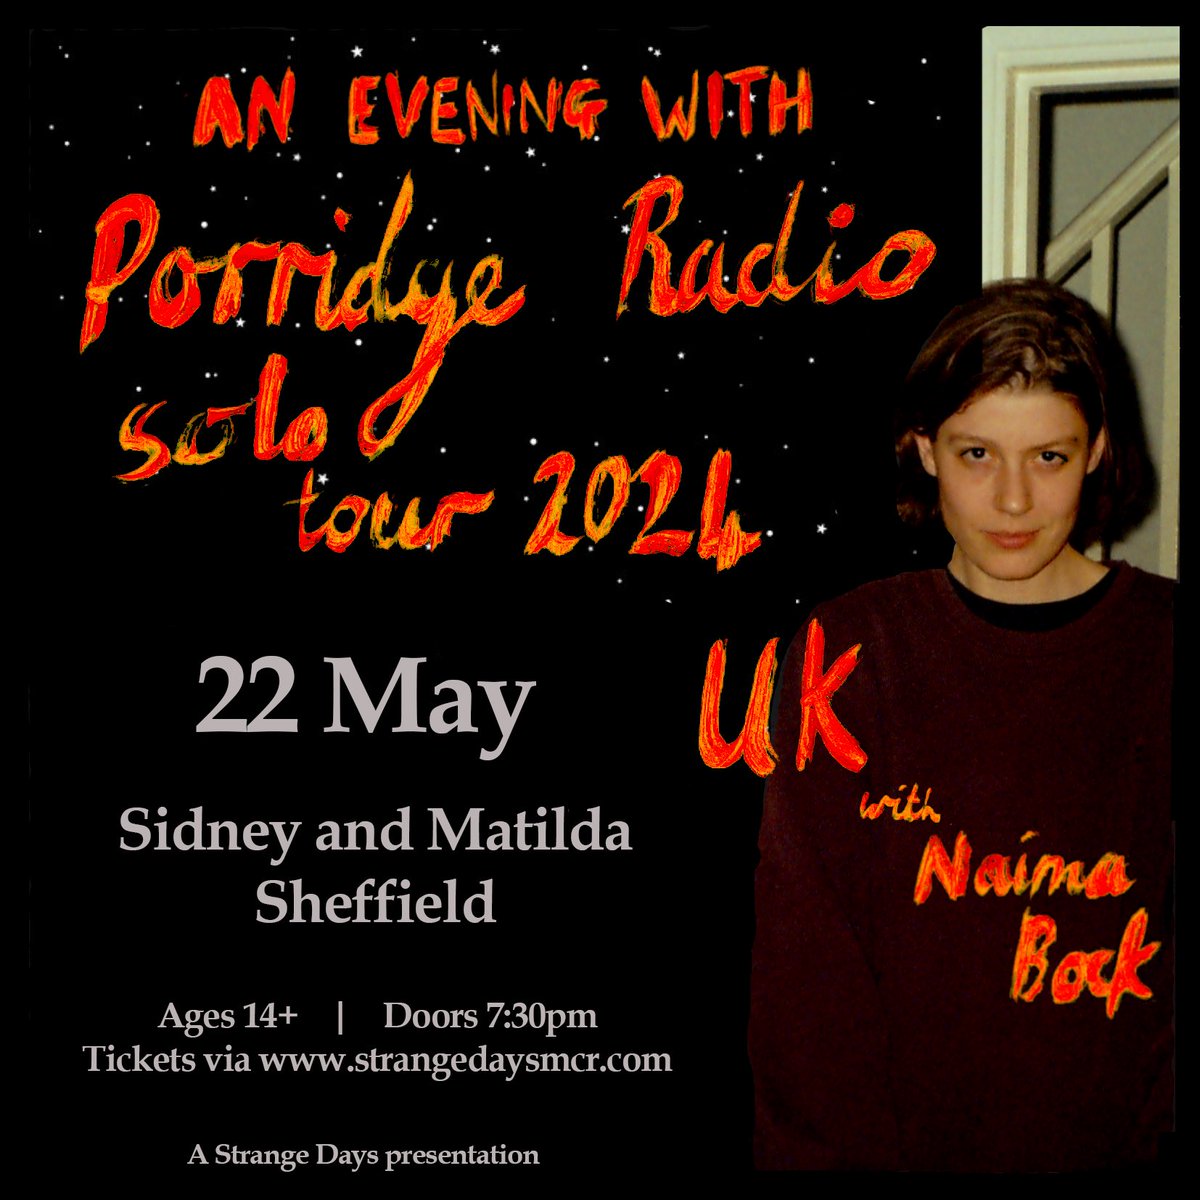 We’re delighted to announce a very special show in Sheffield this May. @porridgeradio’s Dana Margolin comes to @sidneymatilda on Weds 22 May to play a special solo set and will be joined with support from @naimabock 🎫 link.dice.fm/Q7d9bdbf17e3